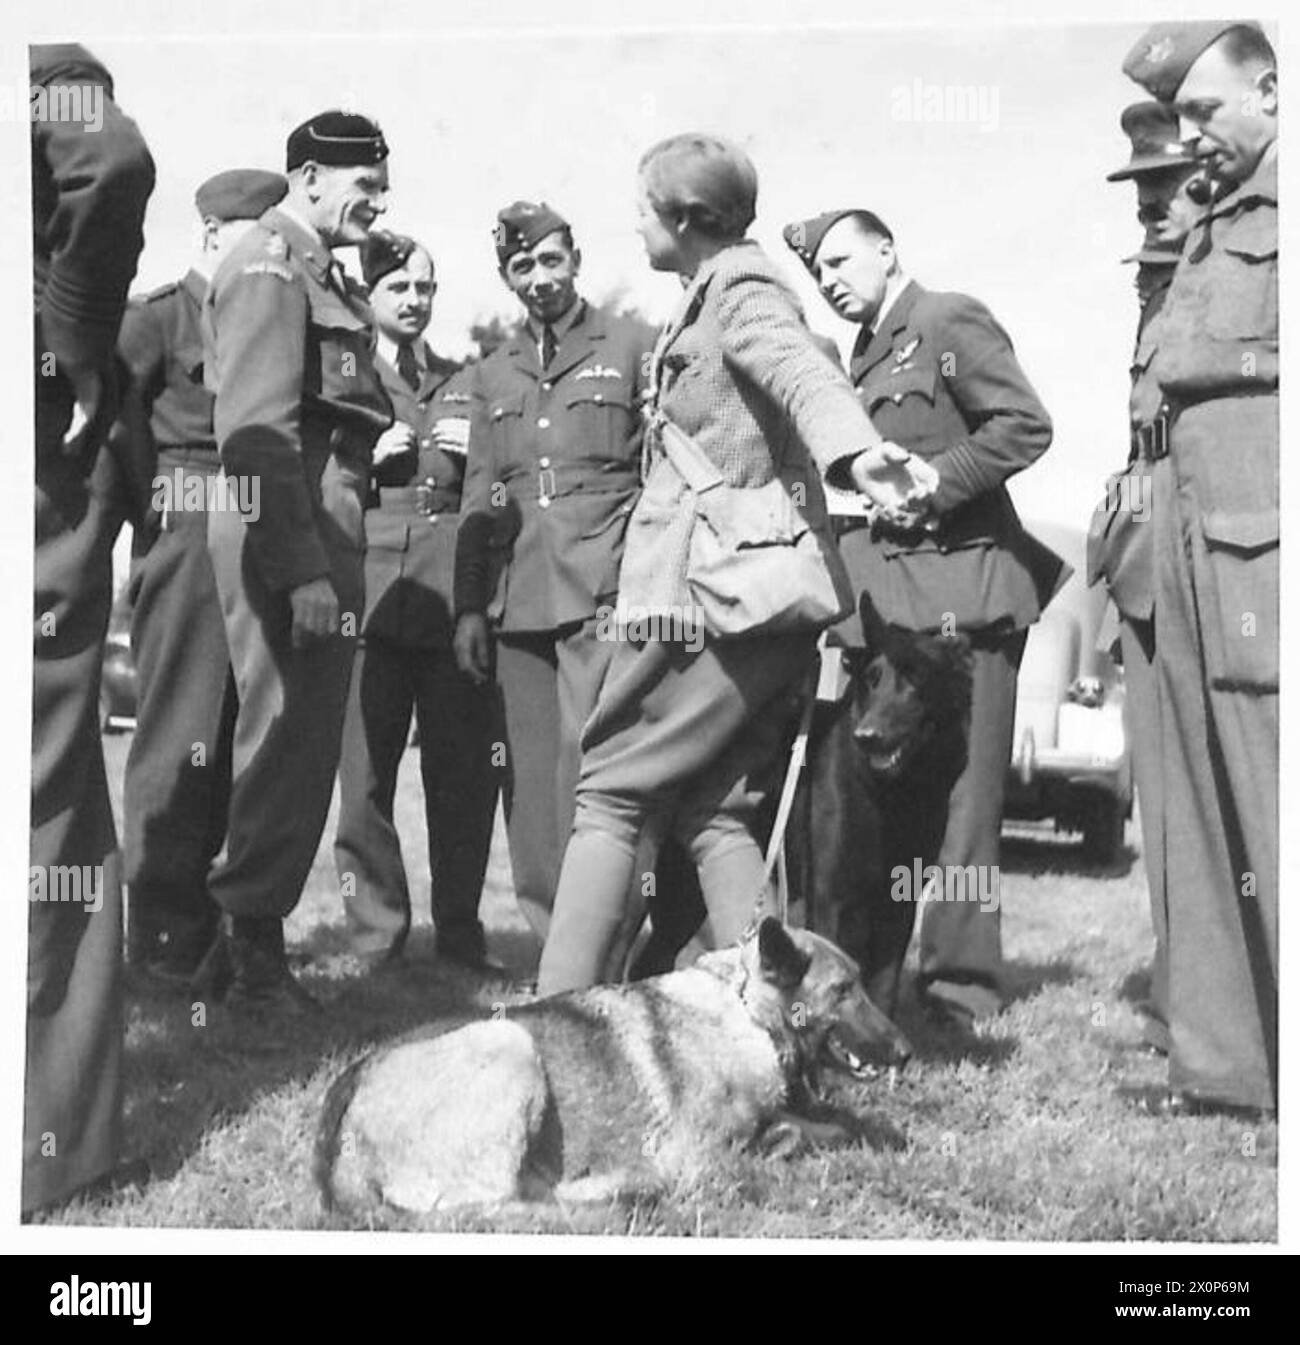 DOGS TO HELP IN AERODROME DEFENCE - Mrs. Griffiths, trainer, explaining the accomplishments of her dogs. Photographic negative , British Army Stock Photo